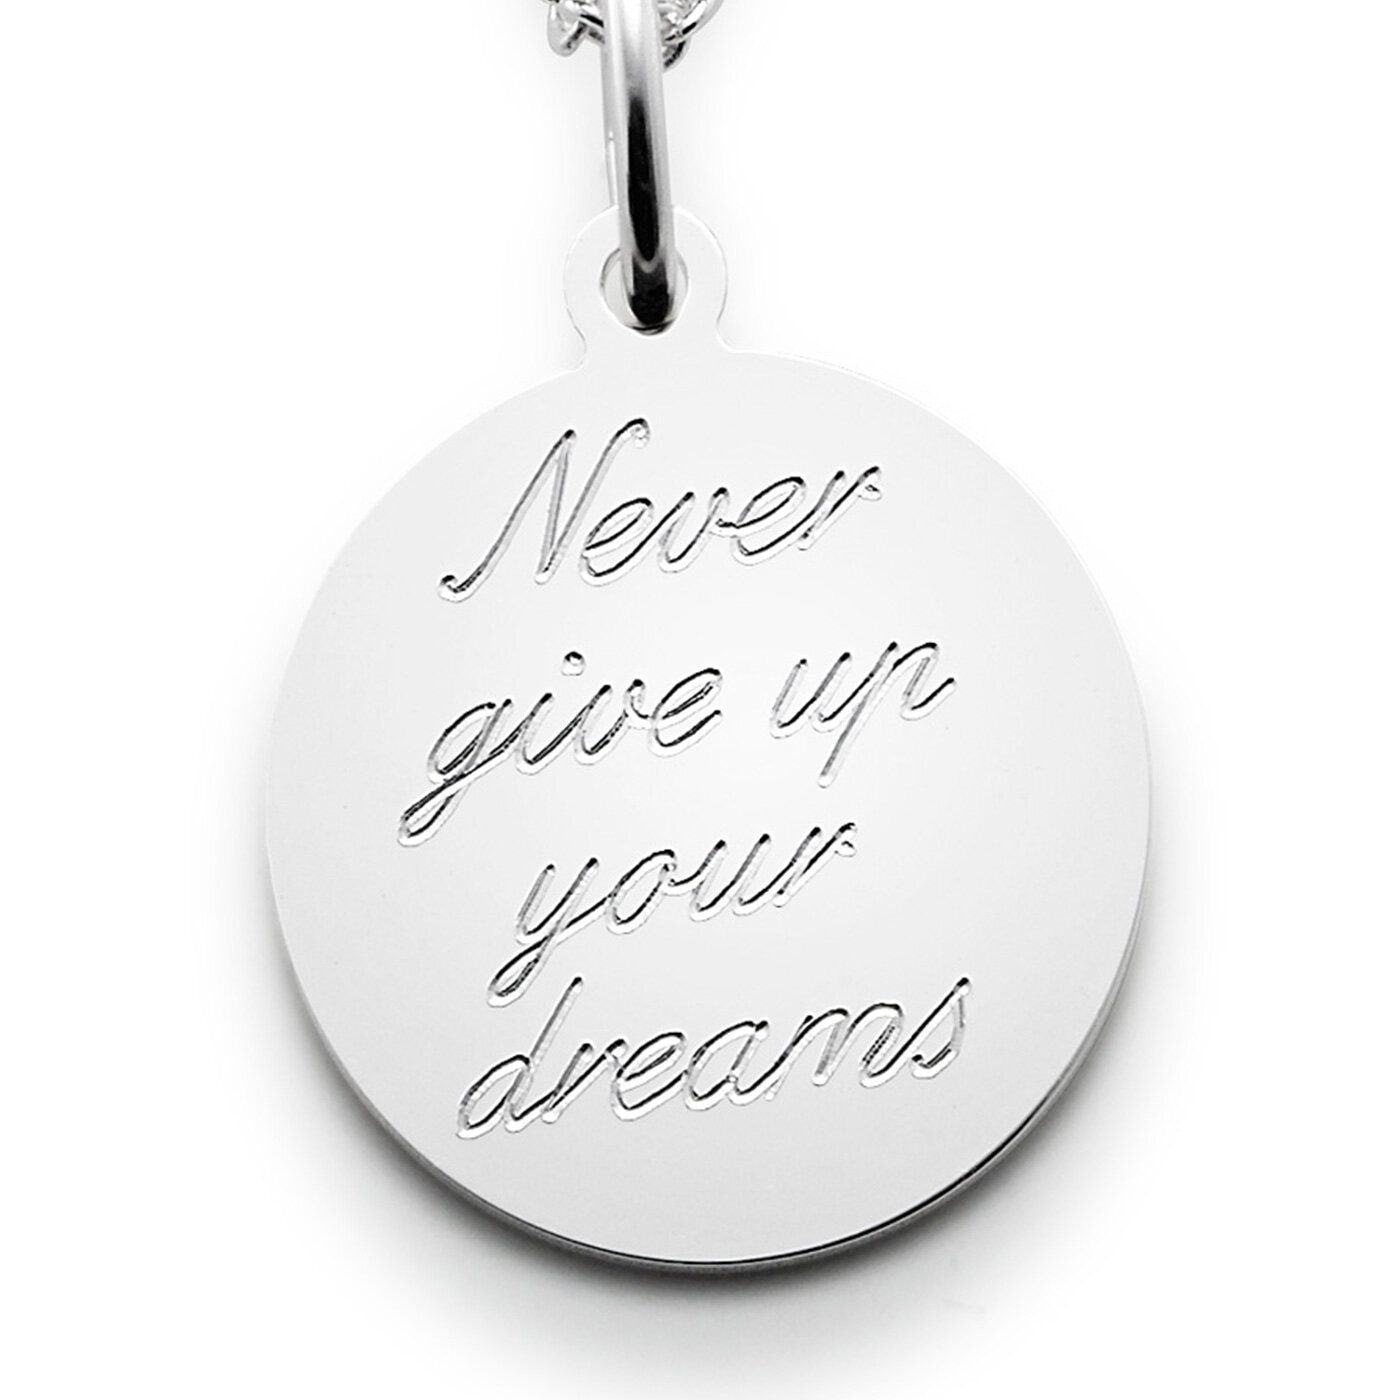 Never give up your dreams necklace